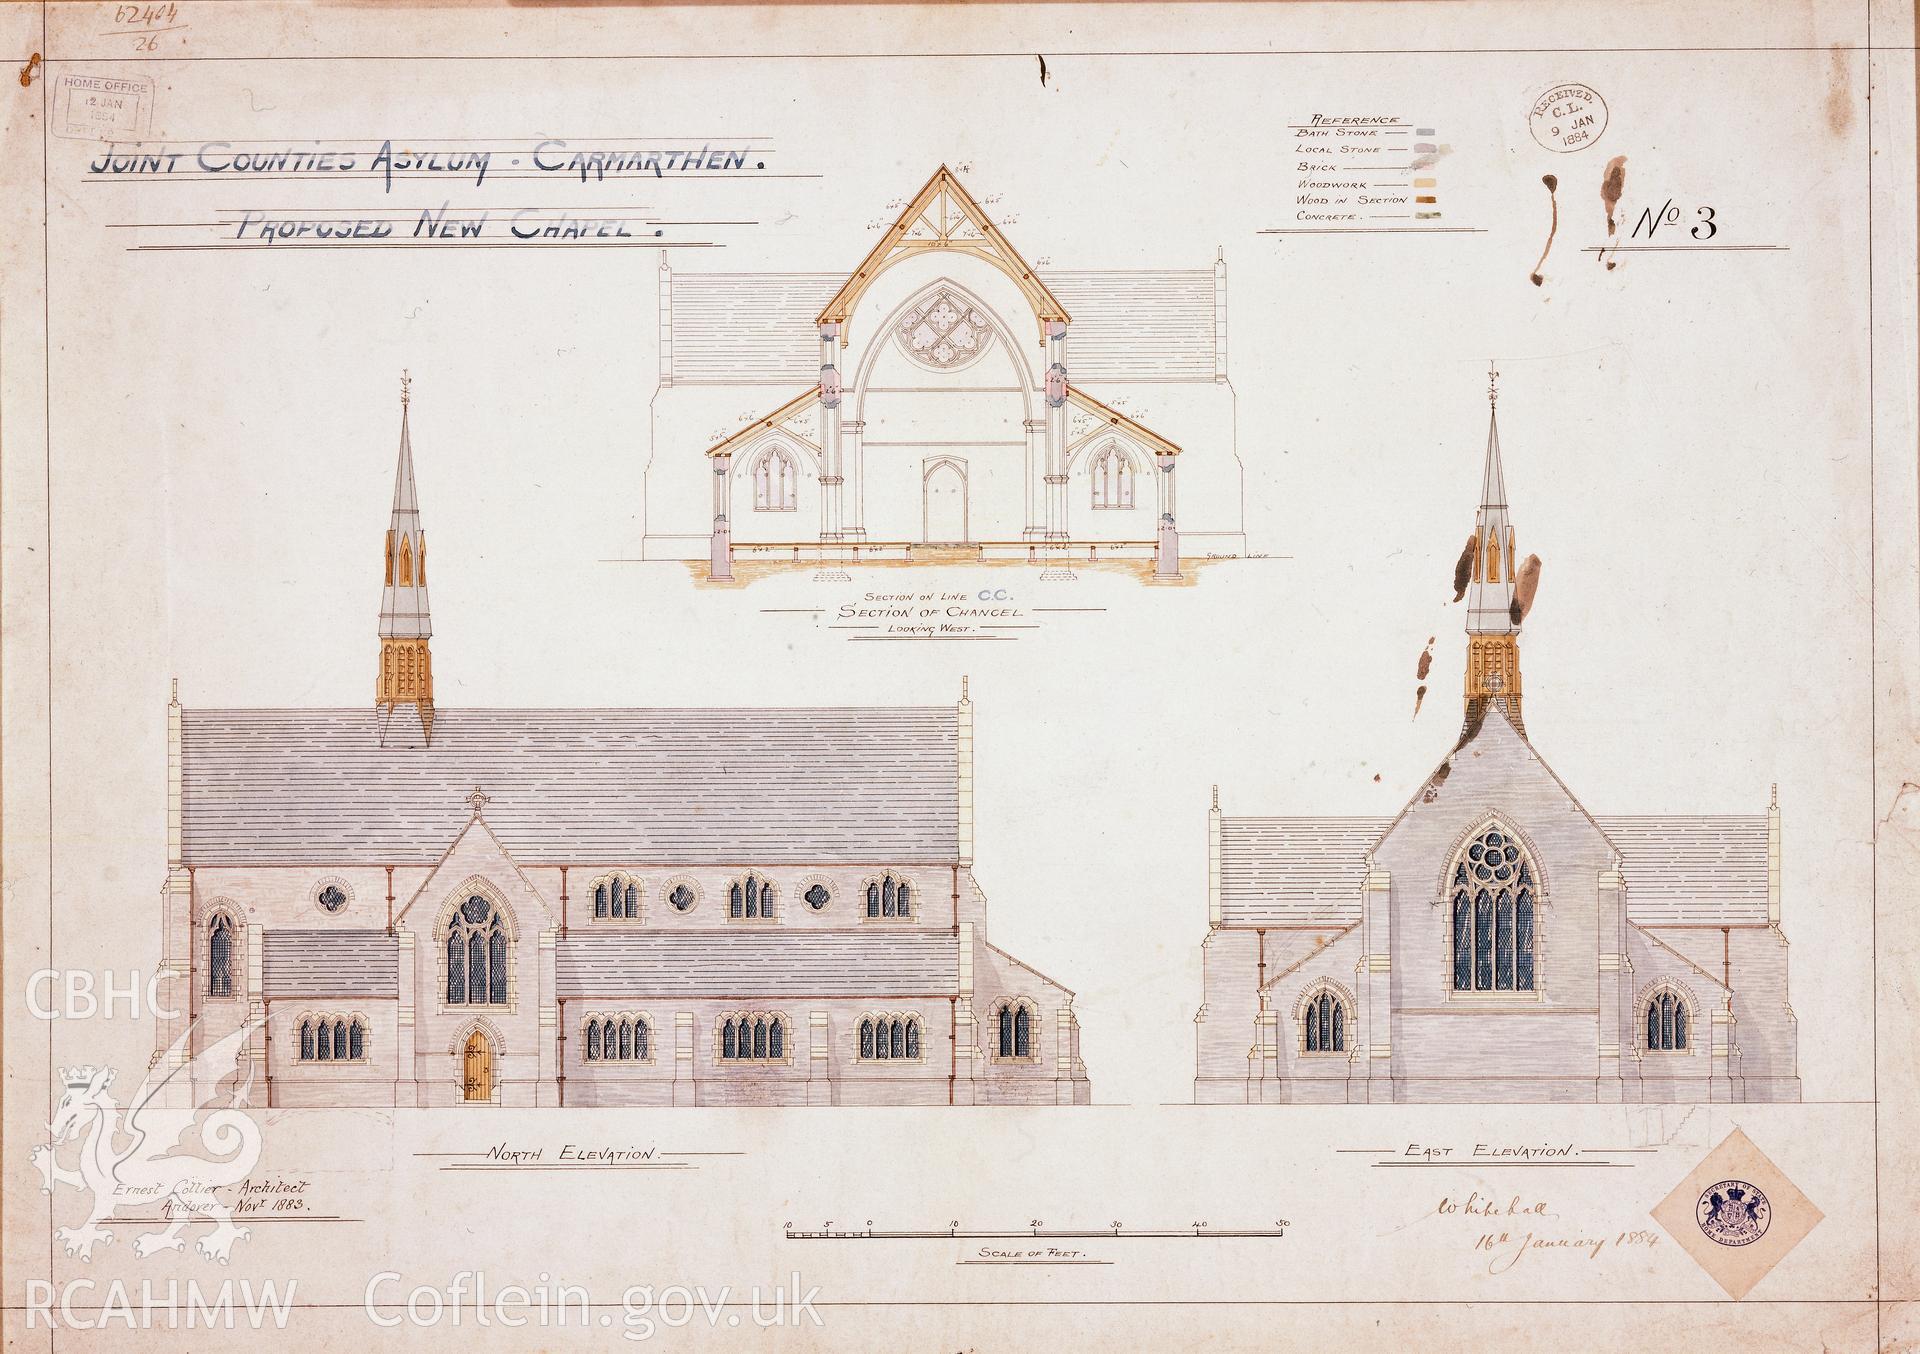 RCAHMW colour transparency of 1884 drawings showing proposed new chapel at St David's Hospital,  Carmarthen.